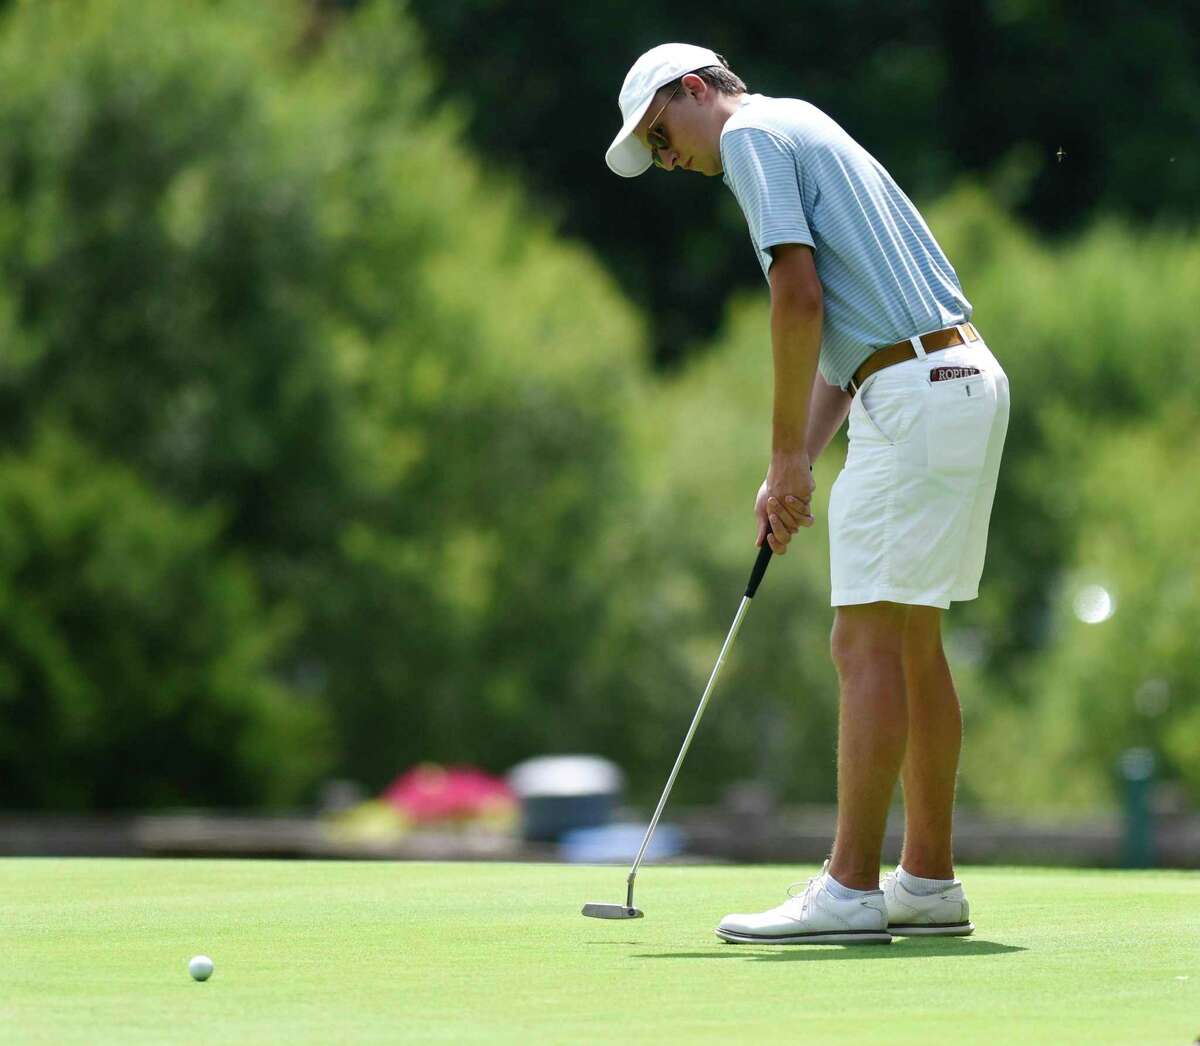 Ben Ropiak putts in the 76th Annual Town Wide Men's Golf Tournament at Griffith E. Harris Golf Course in Greenwich, Conn. Sunday, June 27, 2021. Ropiak won the Town Wide title, shooting a two-round score of 145.